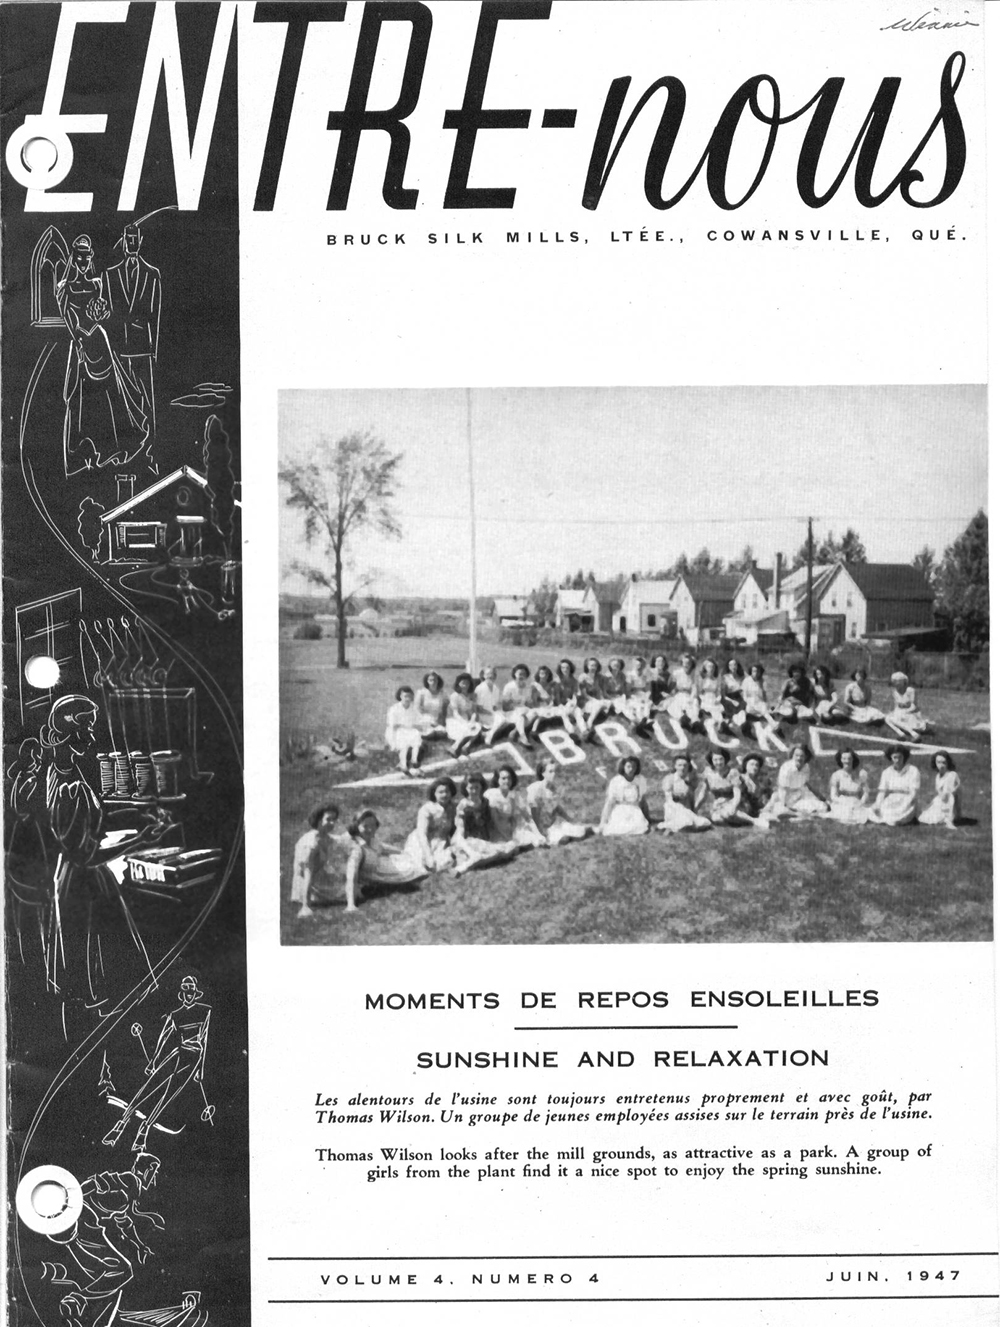 Cover page of the magazine Entre-Nous with two rows of workers sitting on the grass around a flower bed that reads "Bruck"